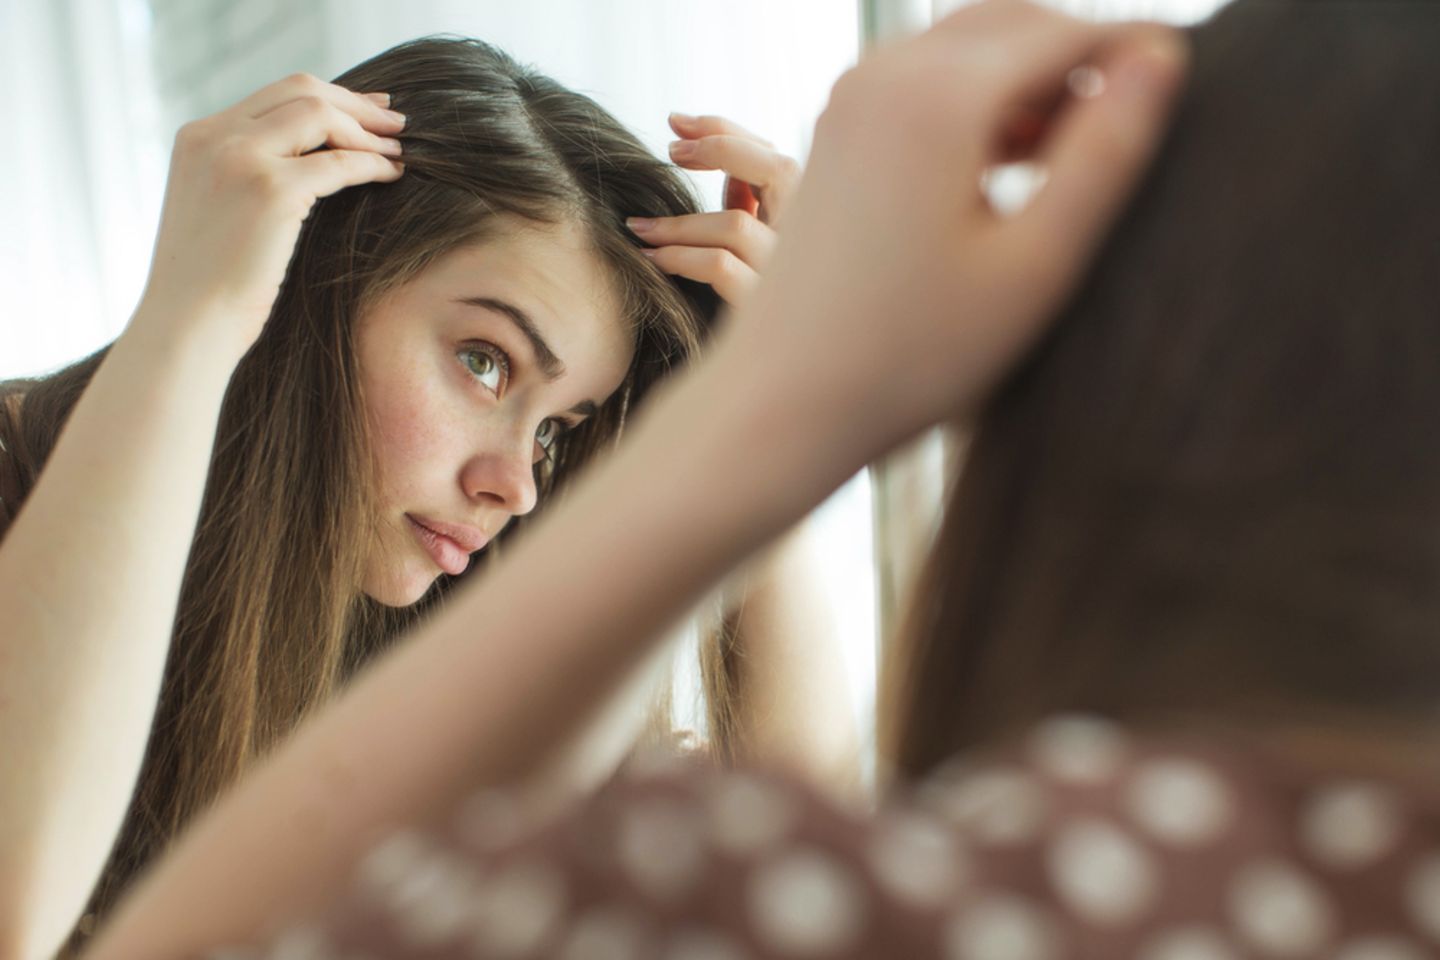 Pimples on the scalp: cause, tips and treatment: woman looks in the mirror and examines her scalp